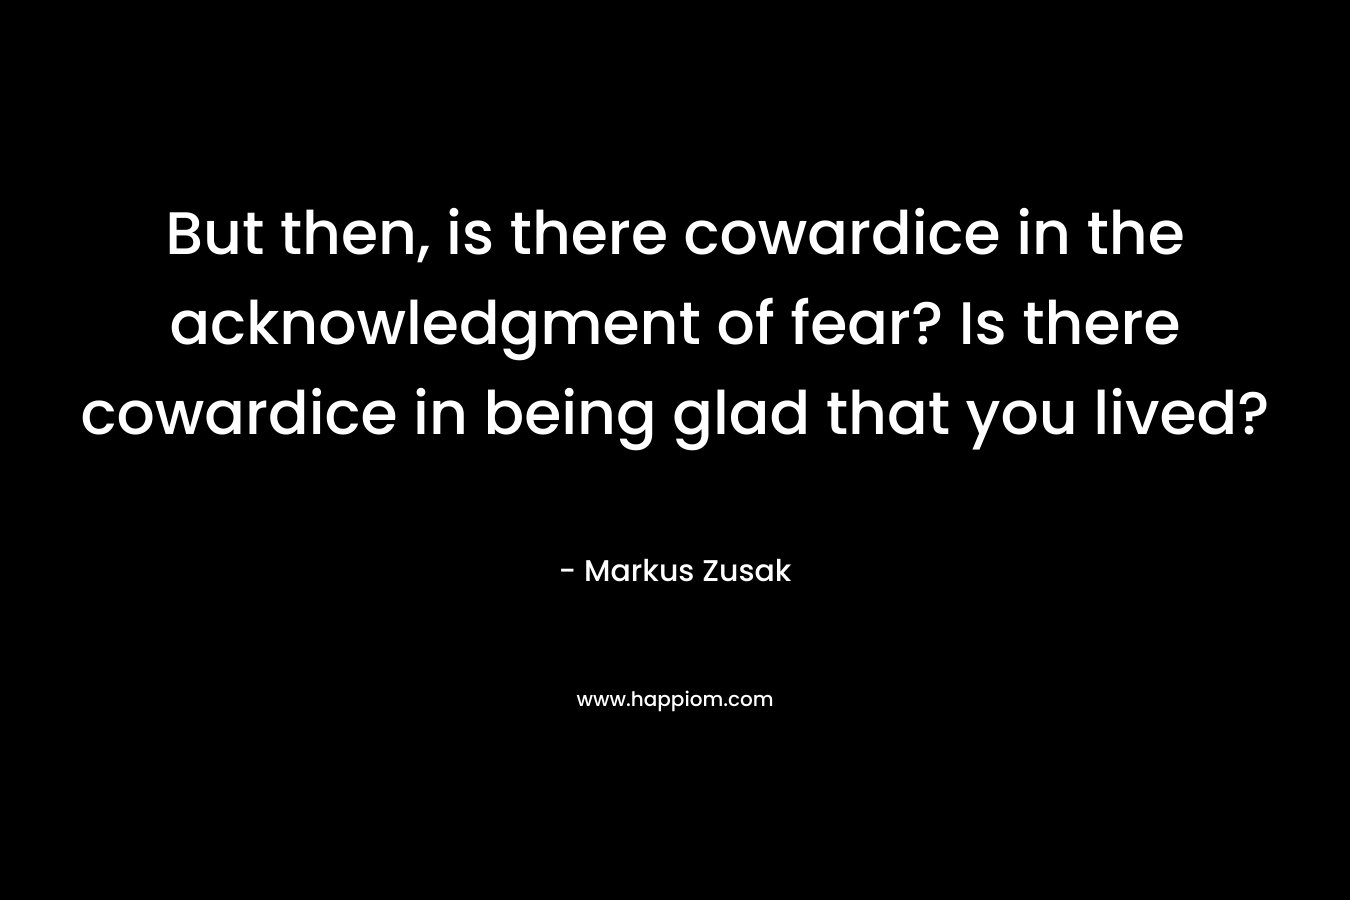 But then, is there cowardice in the acknowledgment of fear? Is there cowardice in being glad that you lived? – Markus Zusak